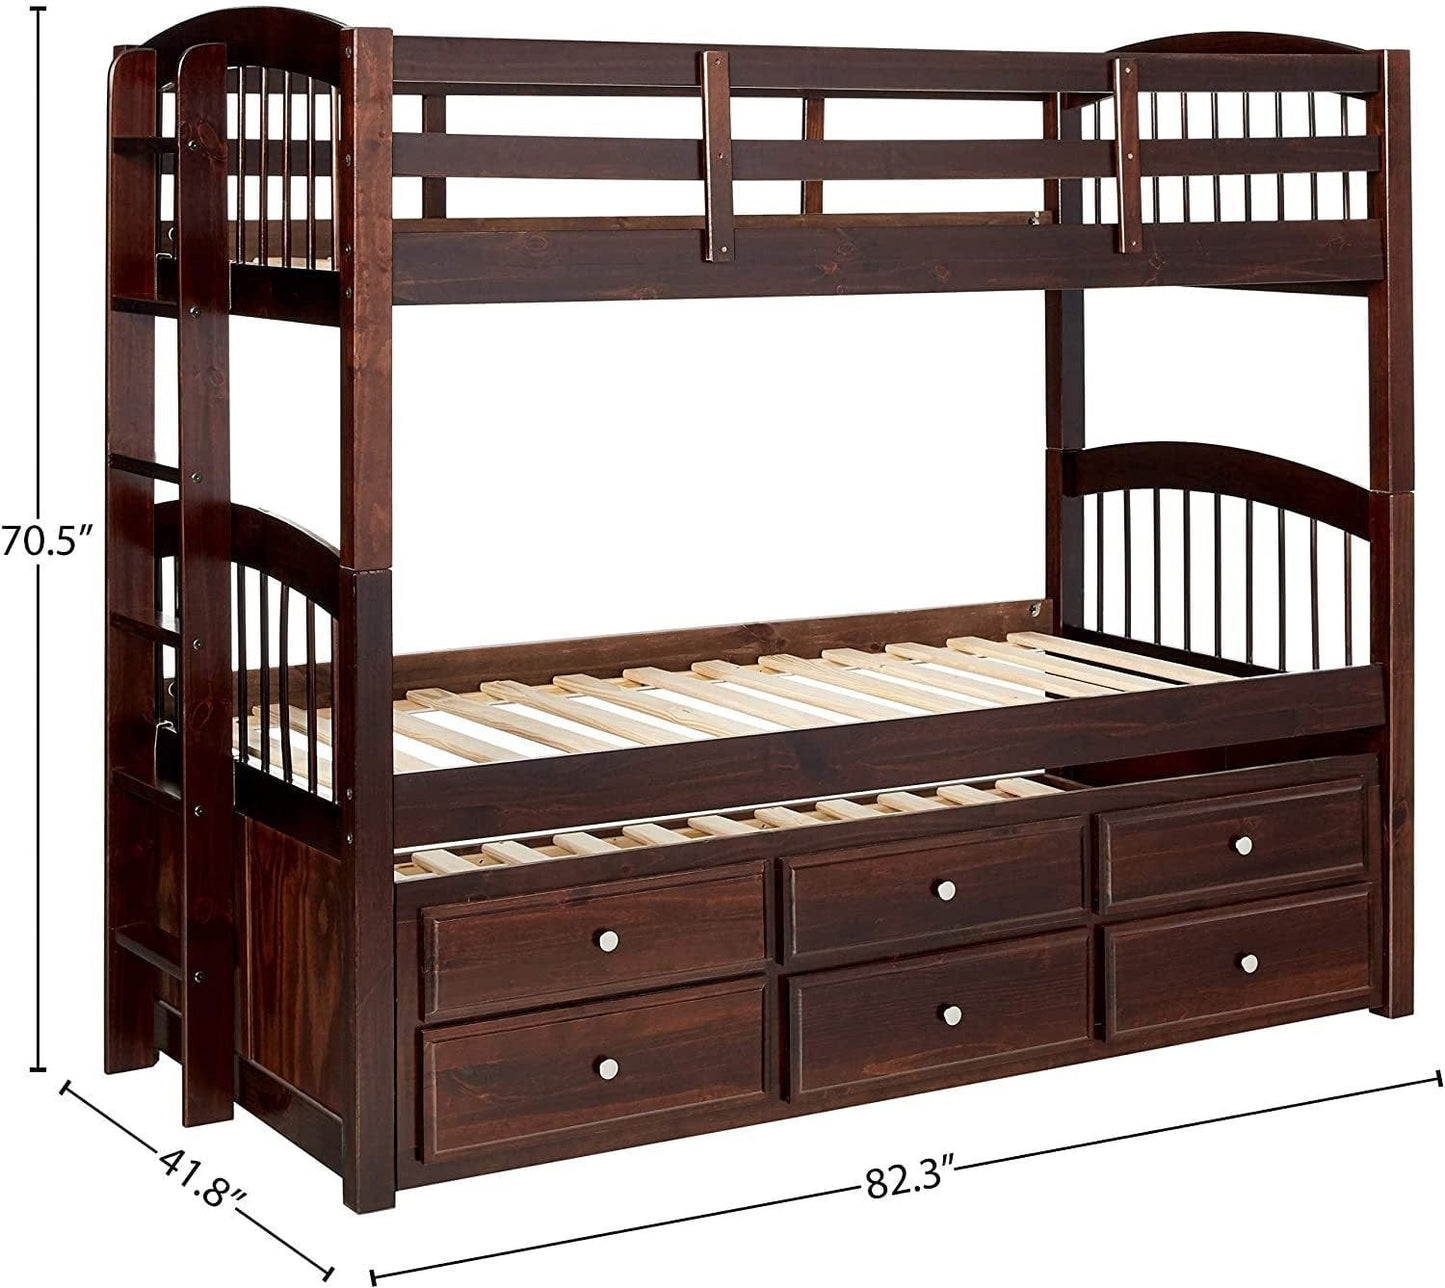 ACME Micah Bunk Bed & Trundle (Twin/Twin) in Espresso 40000